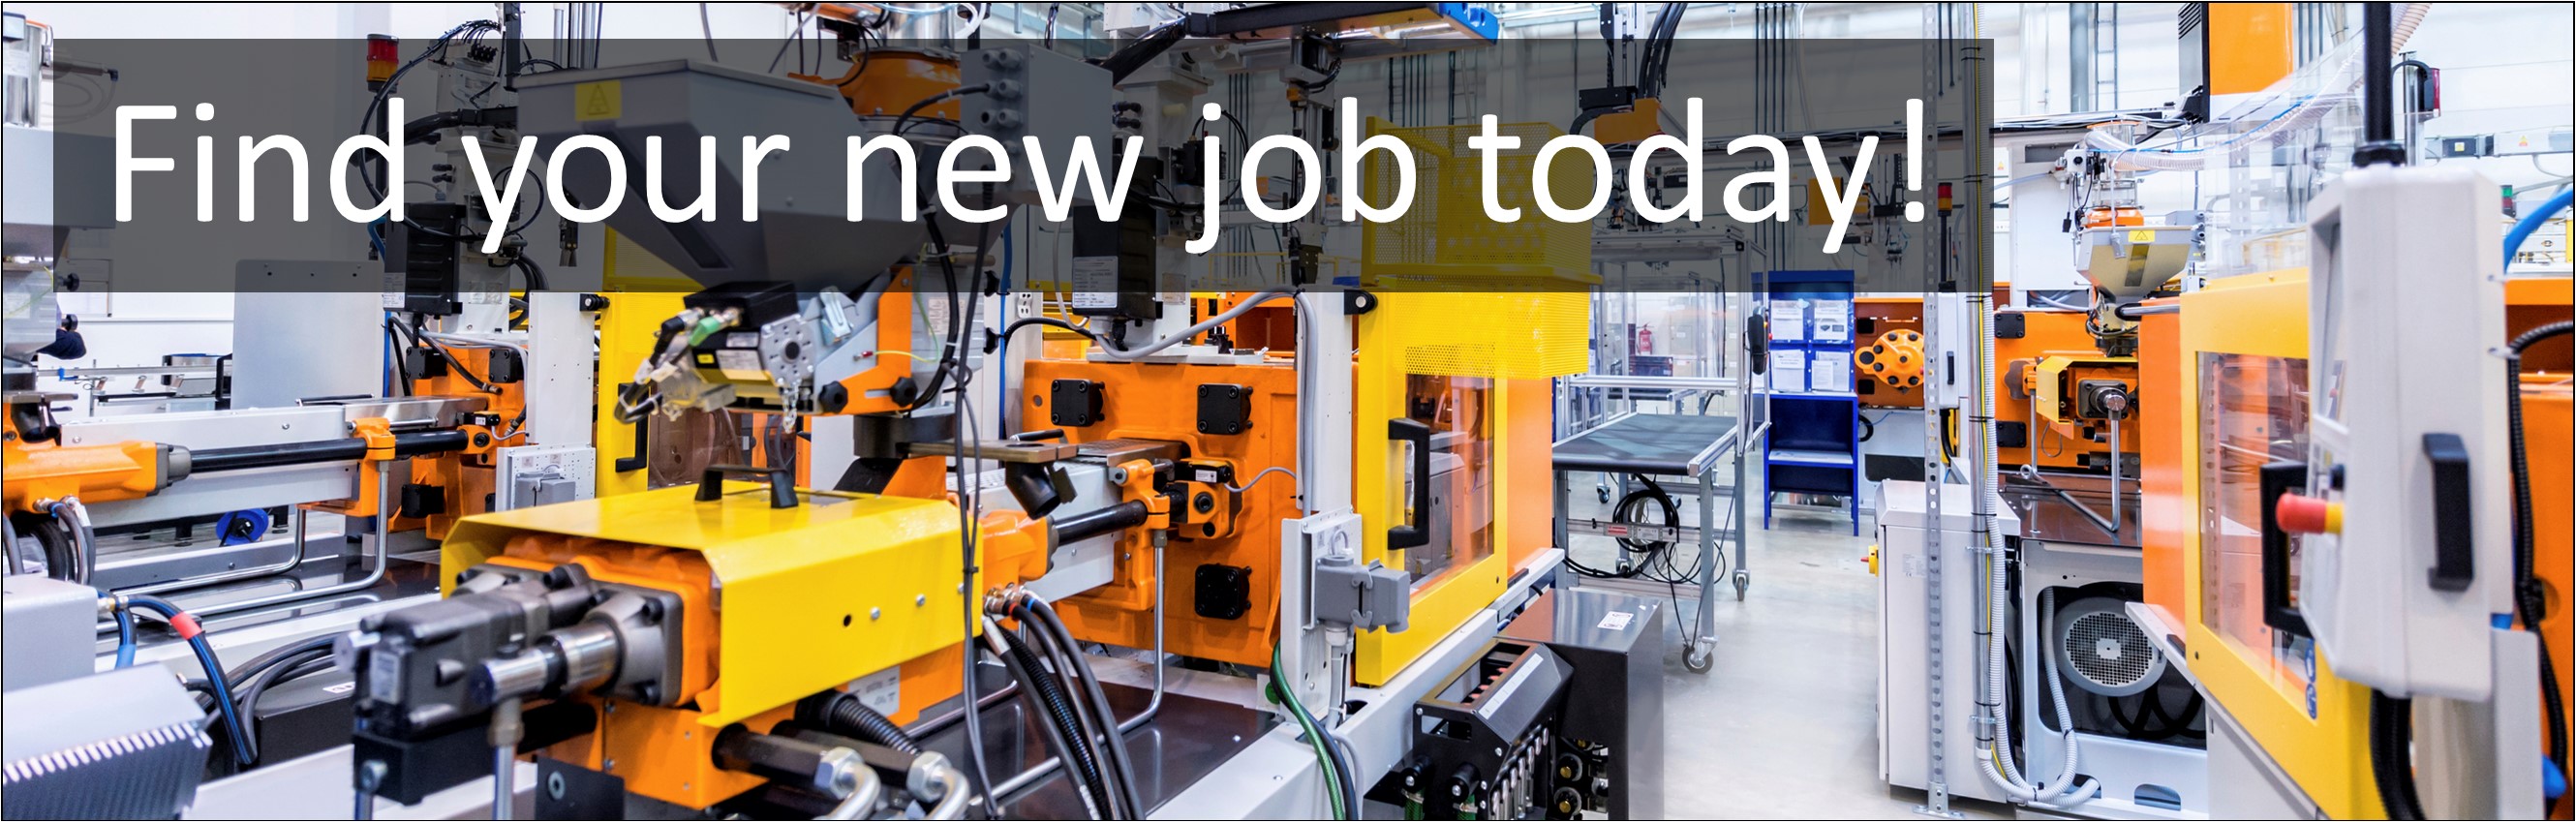 Manufacturing Jobs. Scientist / Chemistry Jobs, Careers & Vacancies in Abingdon, Oxfordshire Advertised by AWD online – Multi-Job Board Advertising and CV Sourcing Recruitment Services